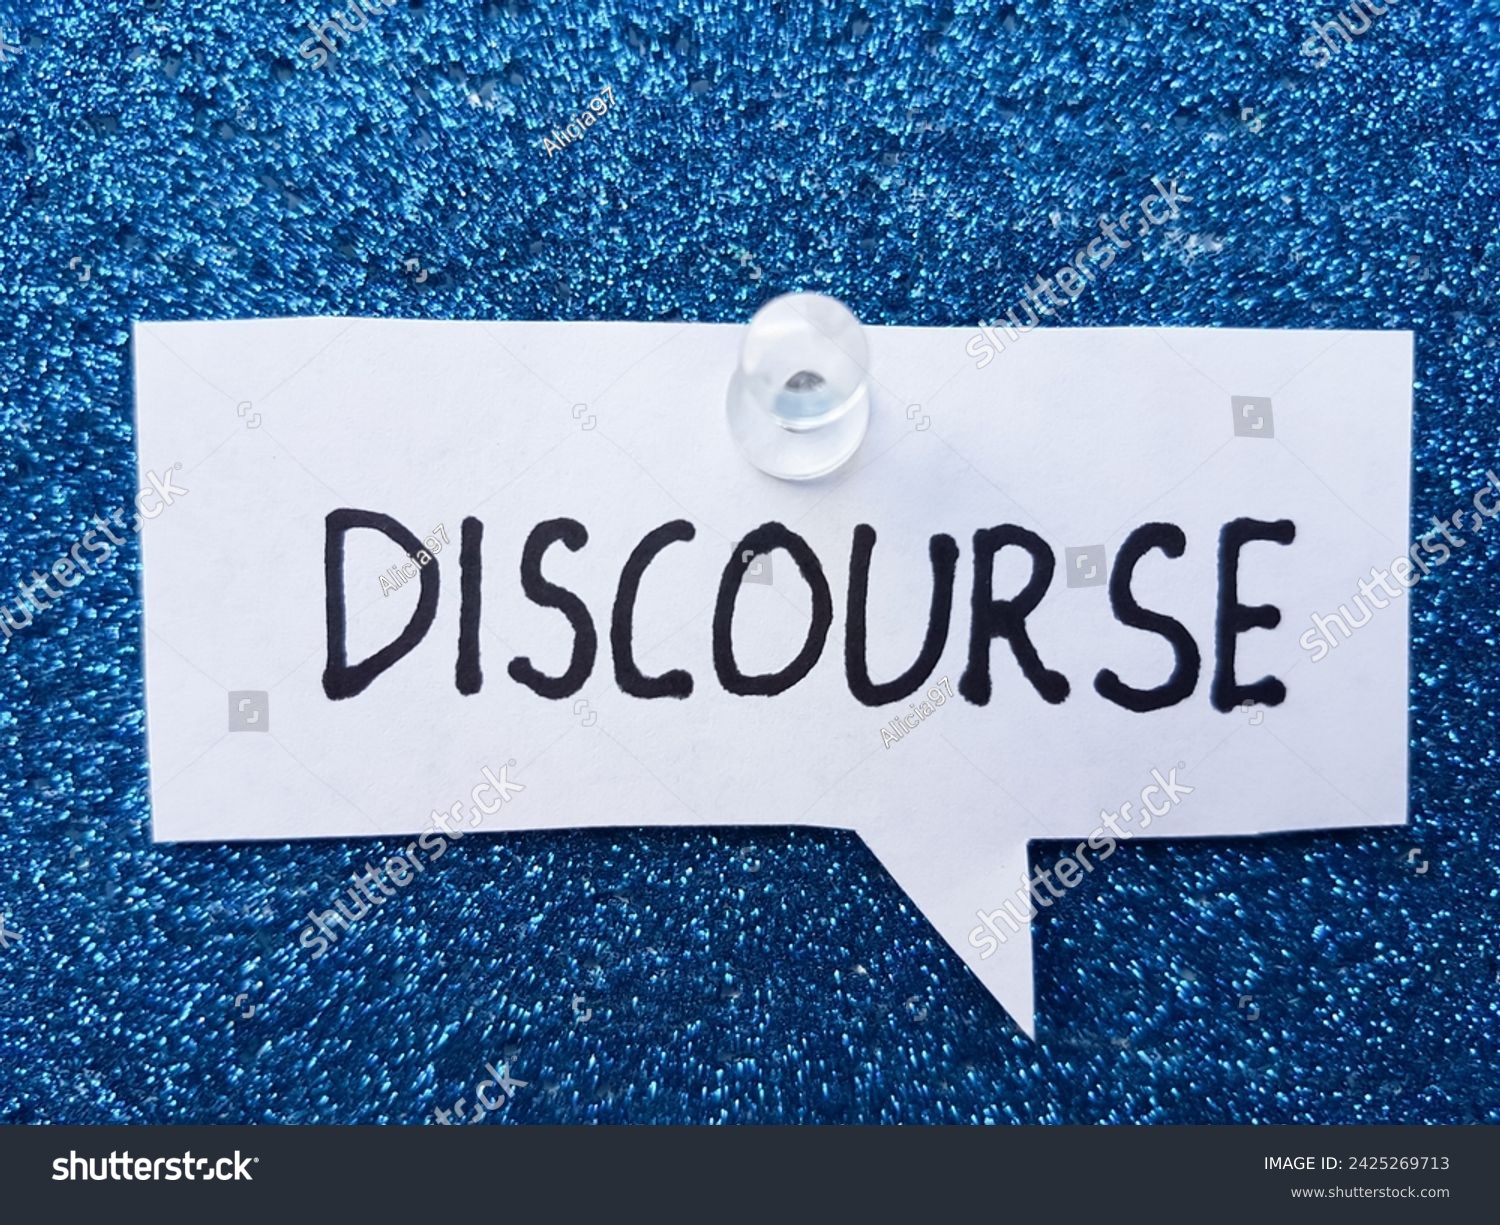 Discourse writting on blue background. #2425269713